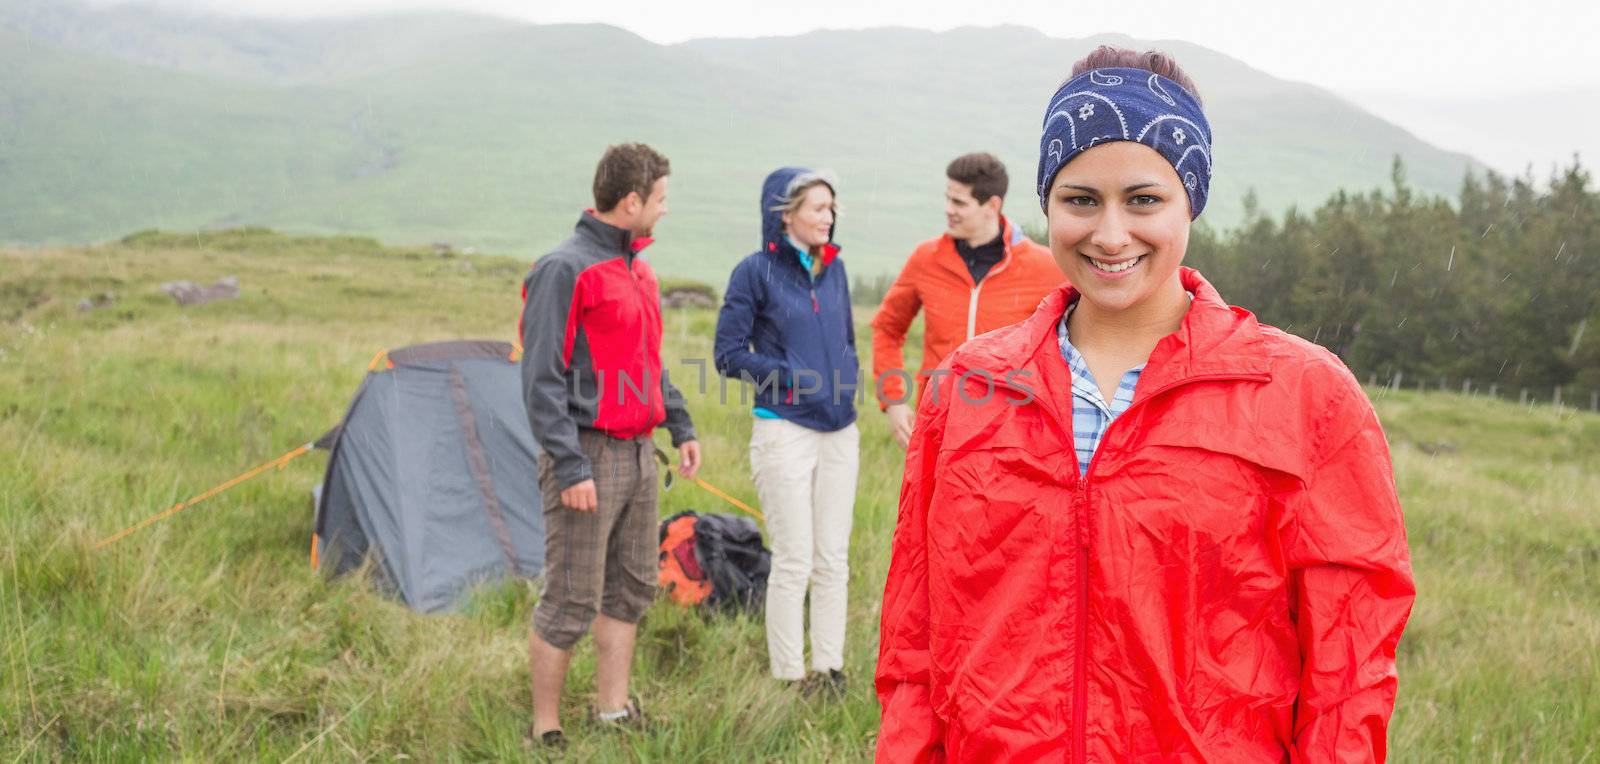 Brunette smiling at camera with friends behind her on camping trip by Wavebreakmedia